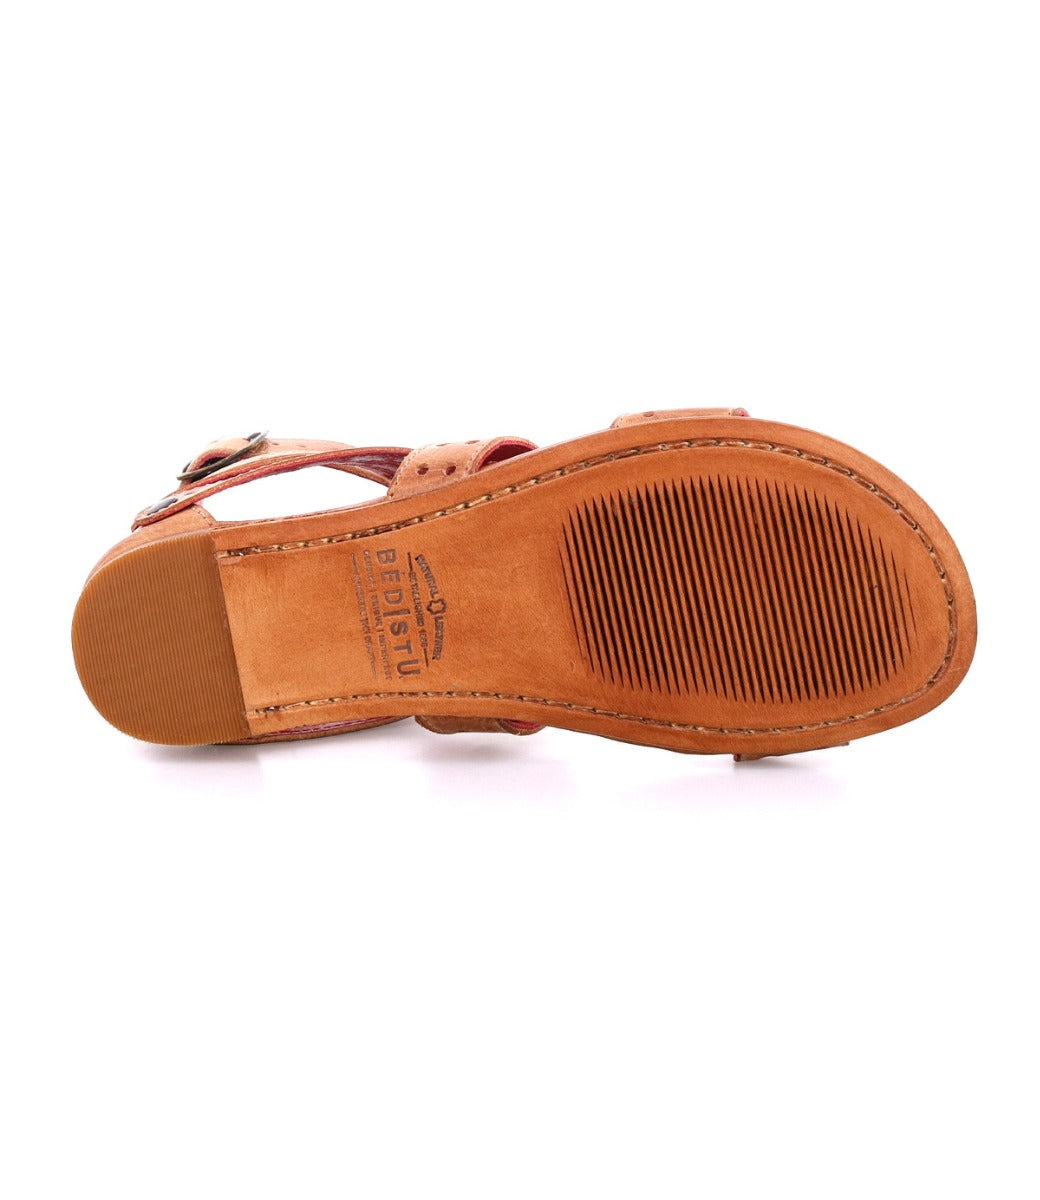 The back view of a Bed Stu women's brown sandal (Artemis M).